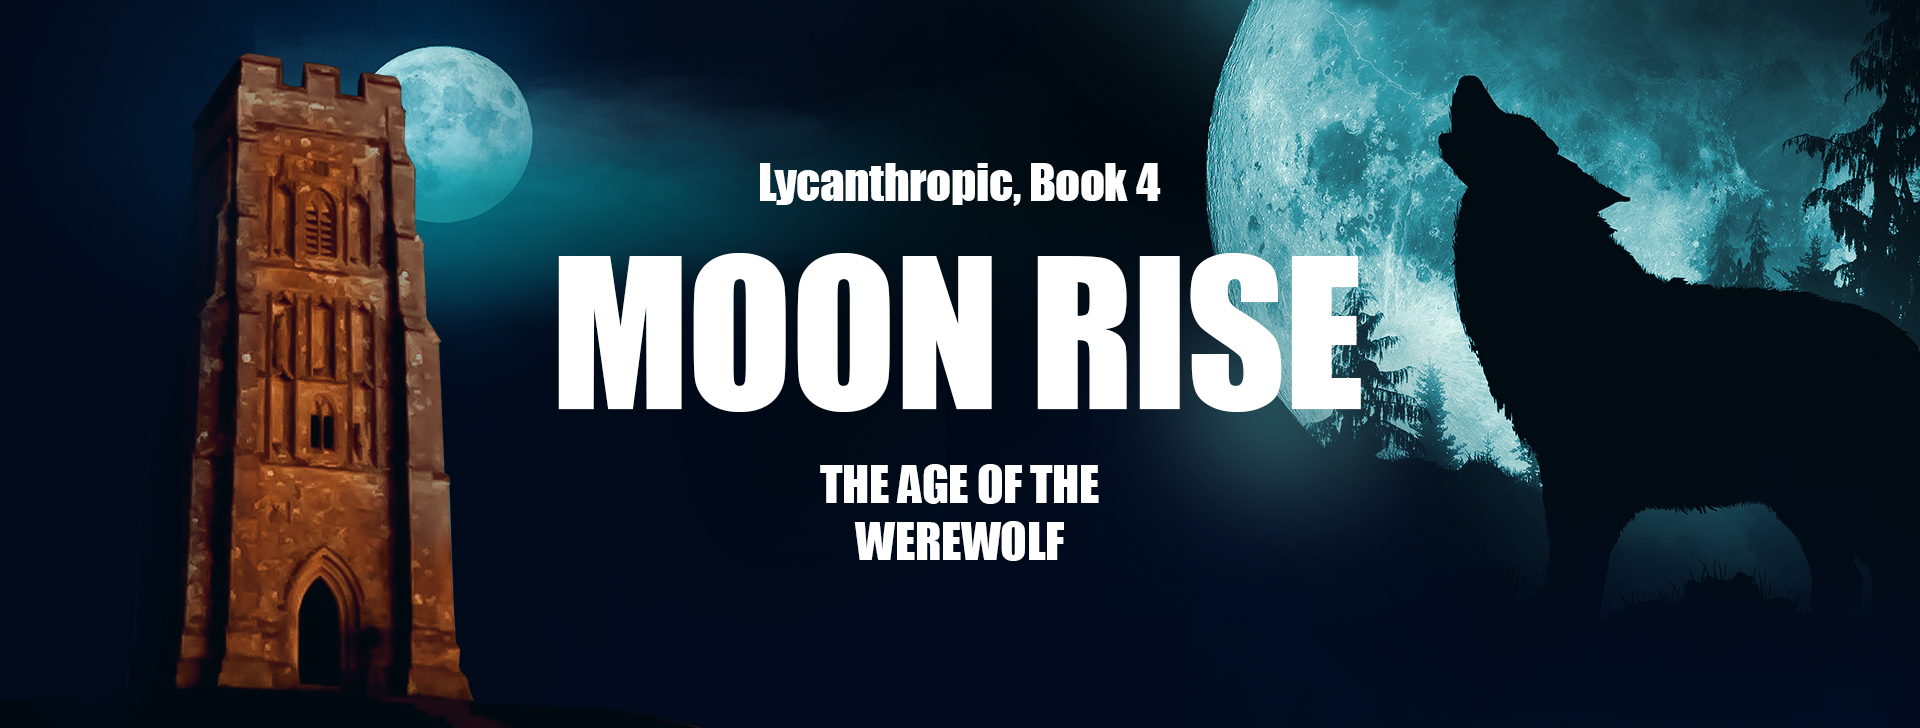 The Age of the Werewolf